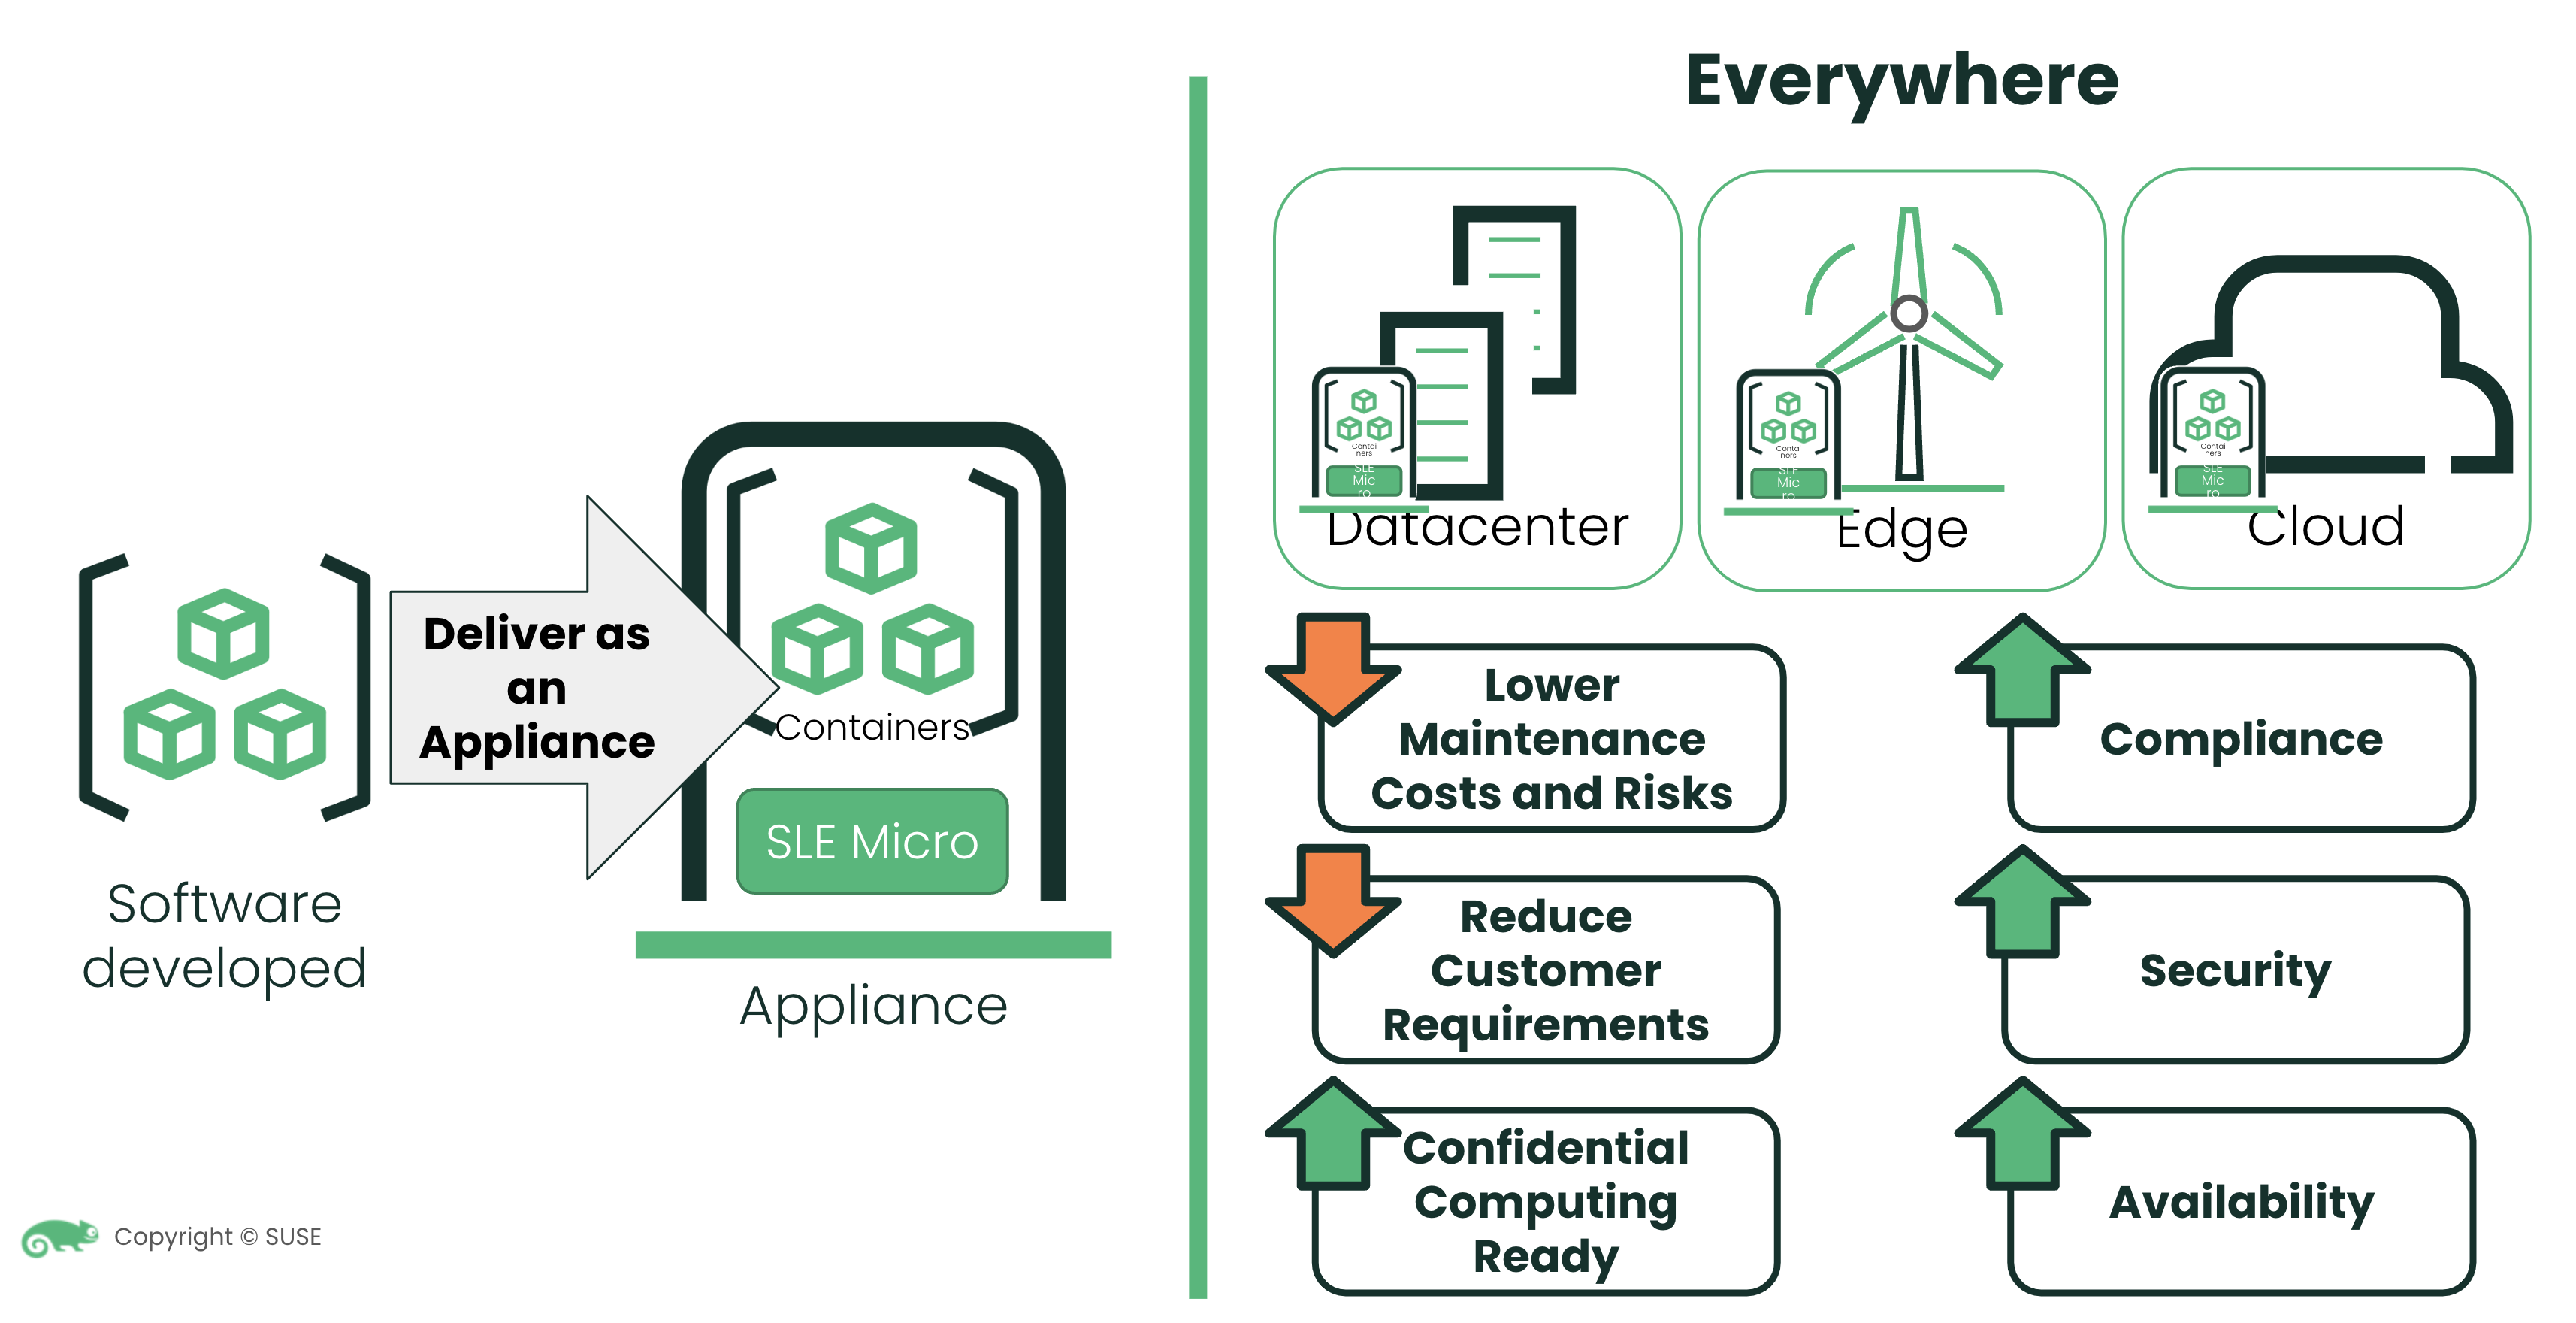 Advantages of deploying software as an appliance with SUSE Linux Enterprise Micro